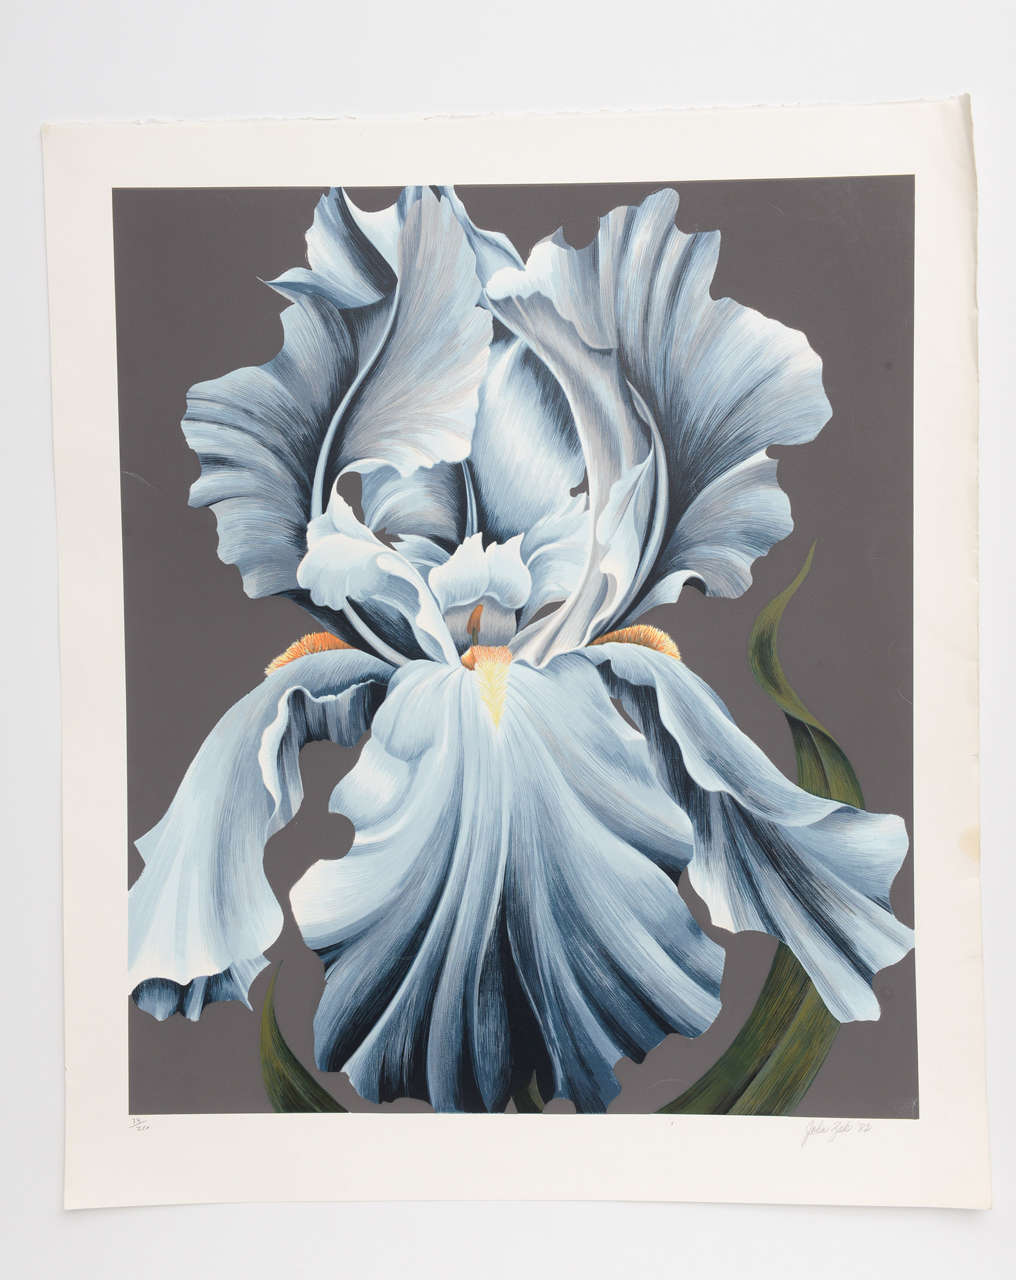 This limited edition lithograph print is signed by the artist and numbered 34/250. It is also stamped with the artists seal. Mr. Zak worked on a number of pieces, mostly Orchids, Lilly's. He has won a number of awards and his works were shown thru